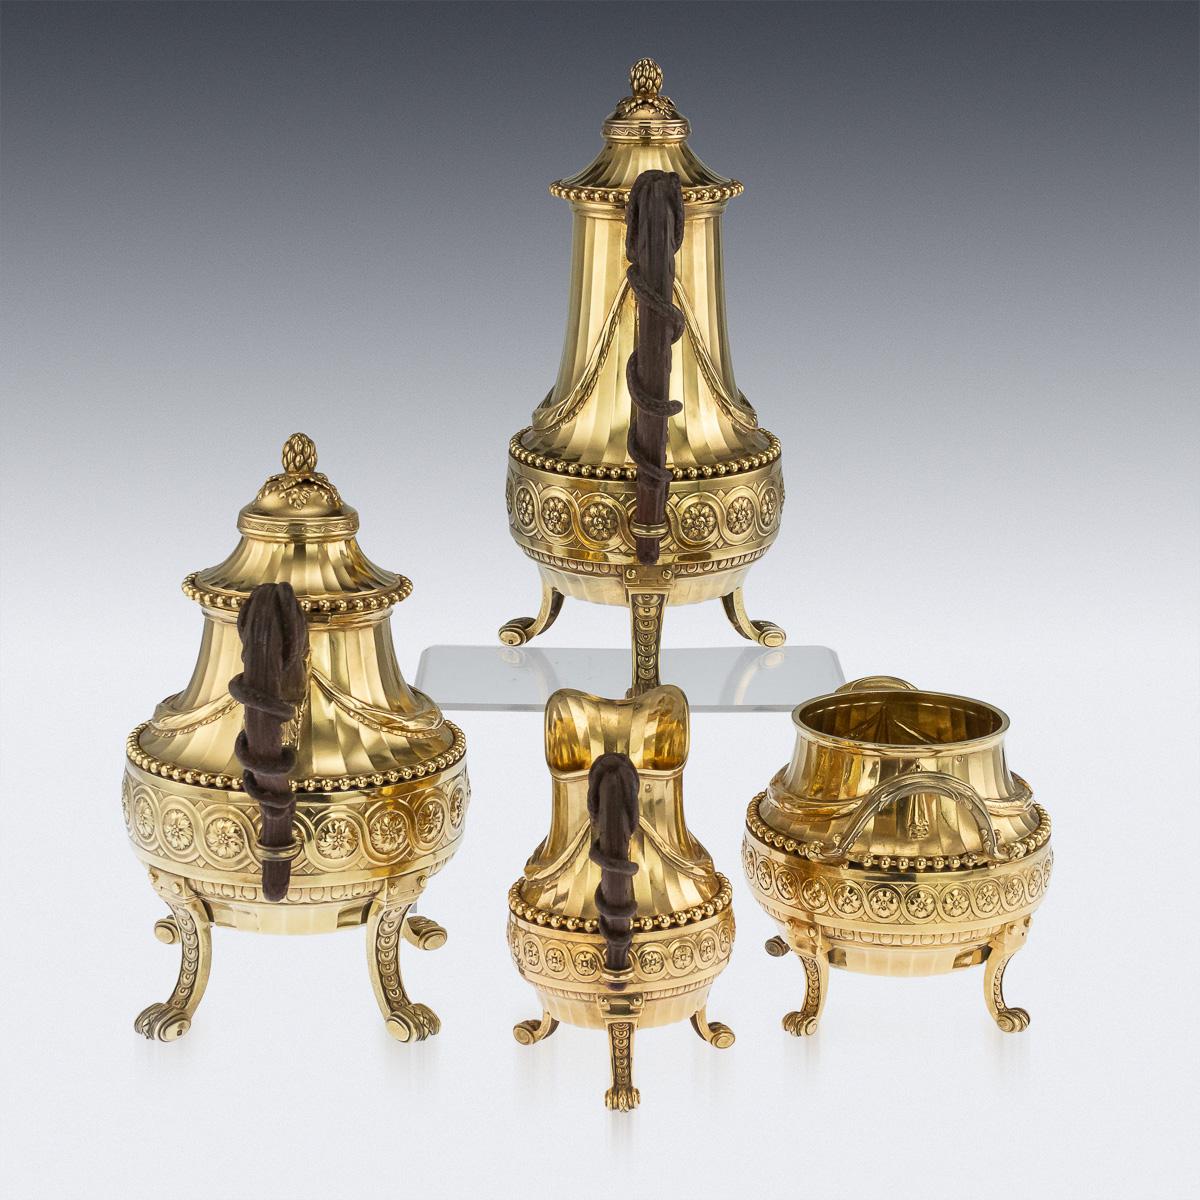 Antique 19th century exceptional French Louis XVI style silver-gilt four piece tea set, comprising of a coffee pot, teapot, sugar bowl and cream jug, all richly gilt throughout. Each piece standing on cast scroll feet, decorated with laurel leaves